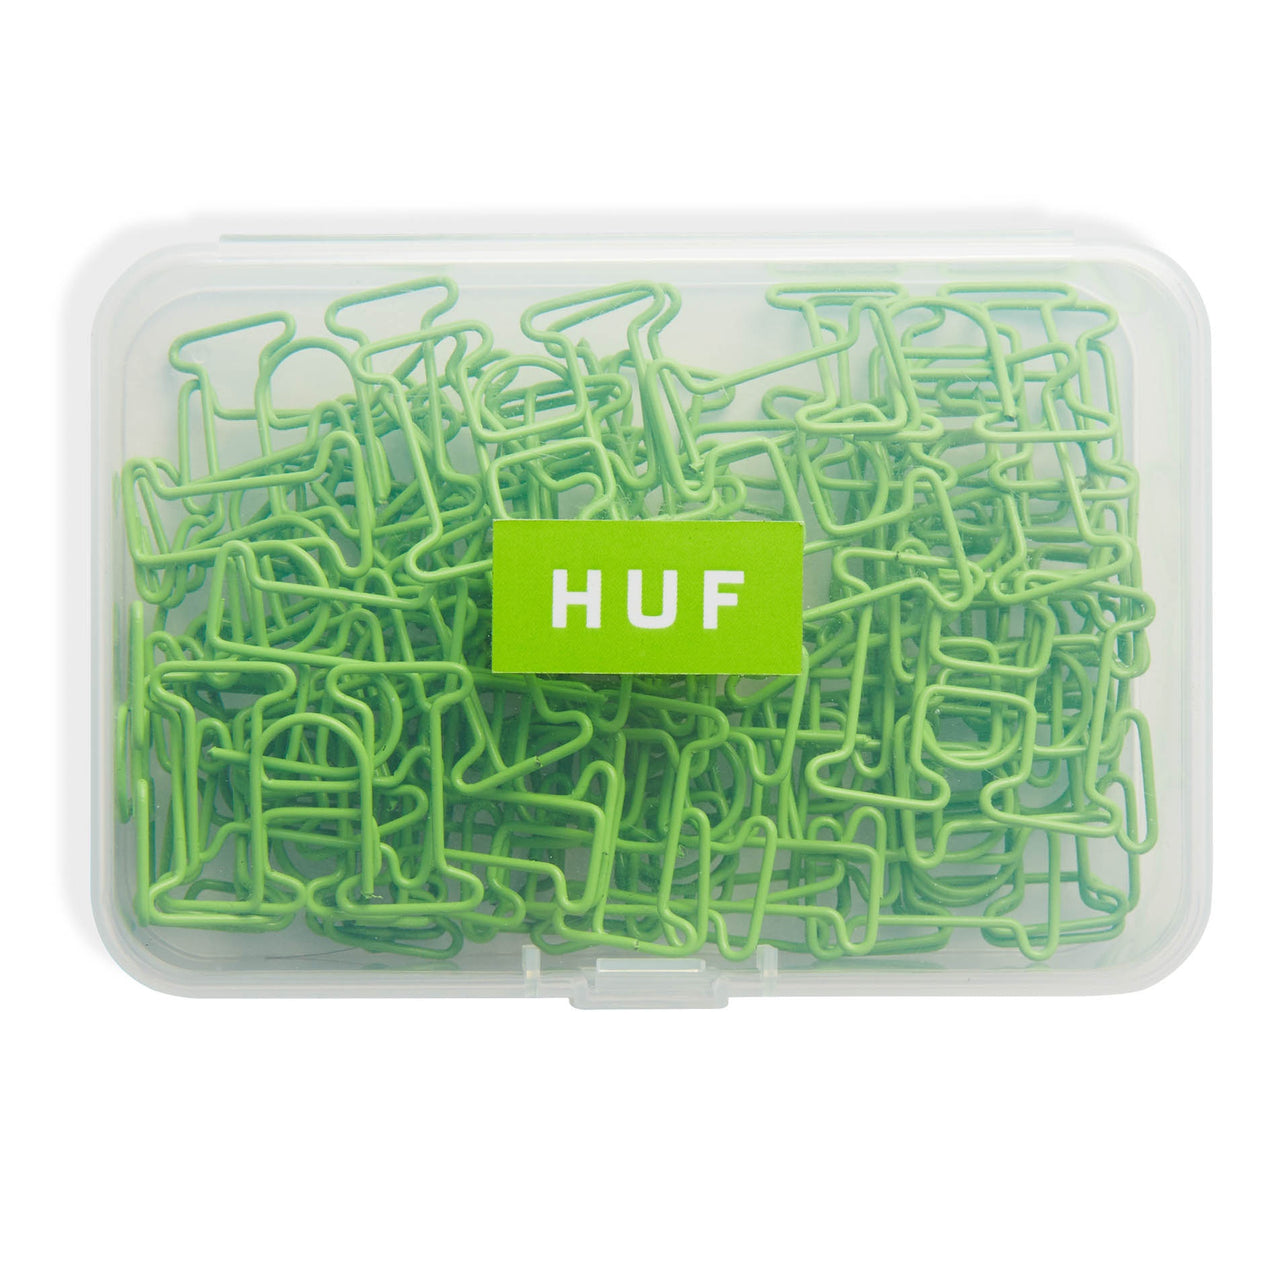 HUF - PAPER CLIPS